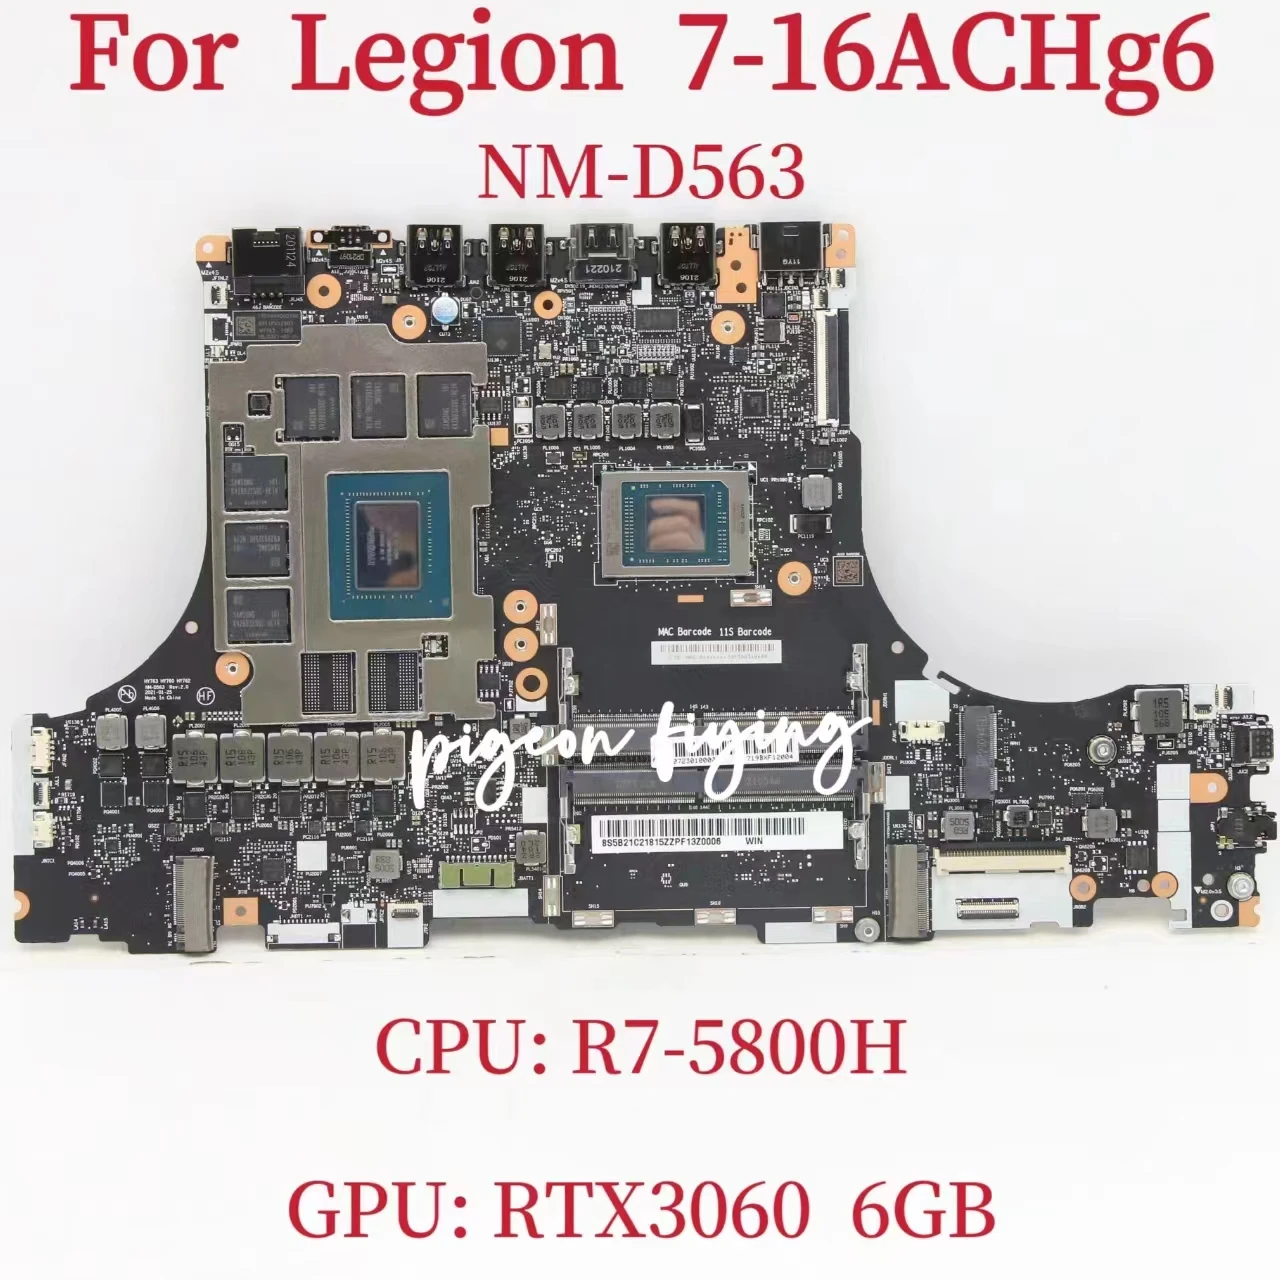 

NM-D563 Mainboard For Lenovo Legion 7-16ACHg6 Laptop Motherboard CPU: R7-5800H GPU:GN20-E3-A1 RTX3060 6GB DDR4 100% Fully Tested